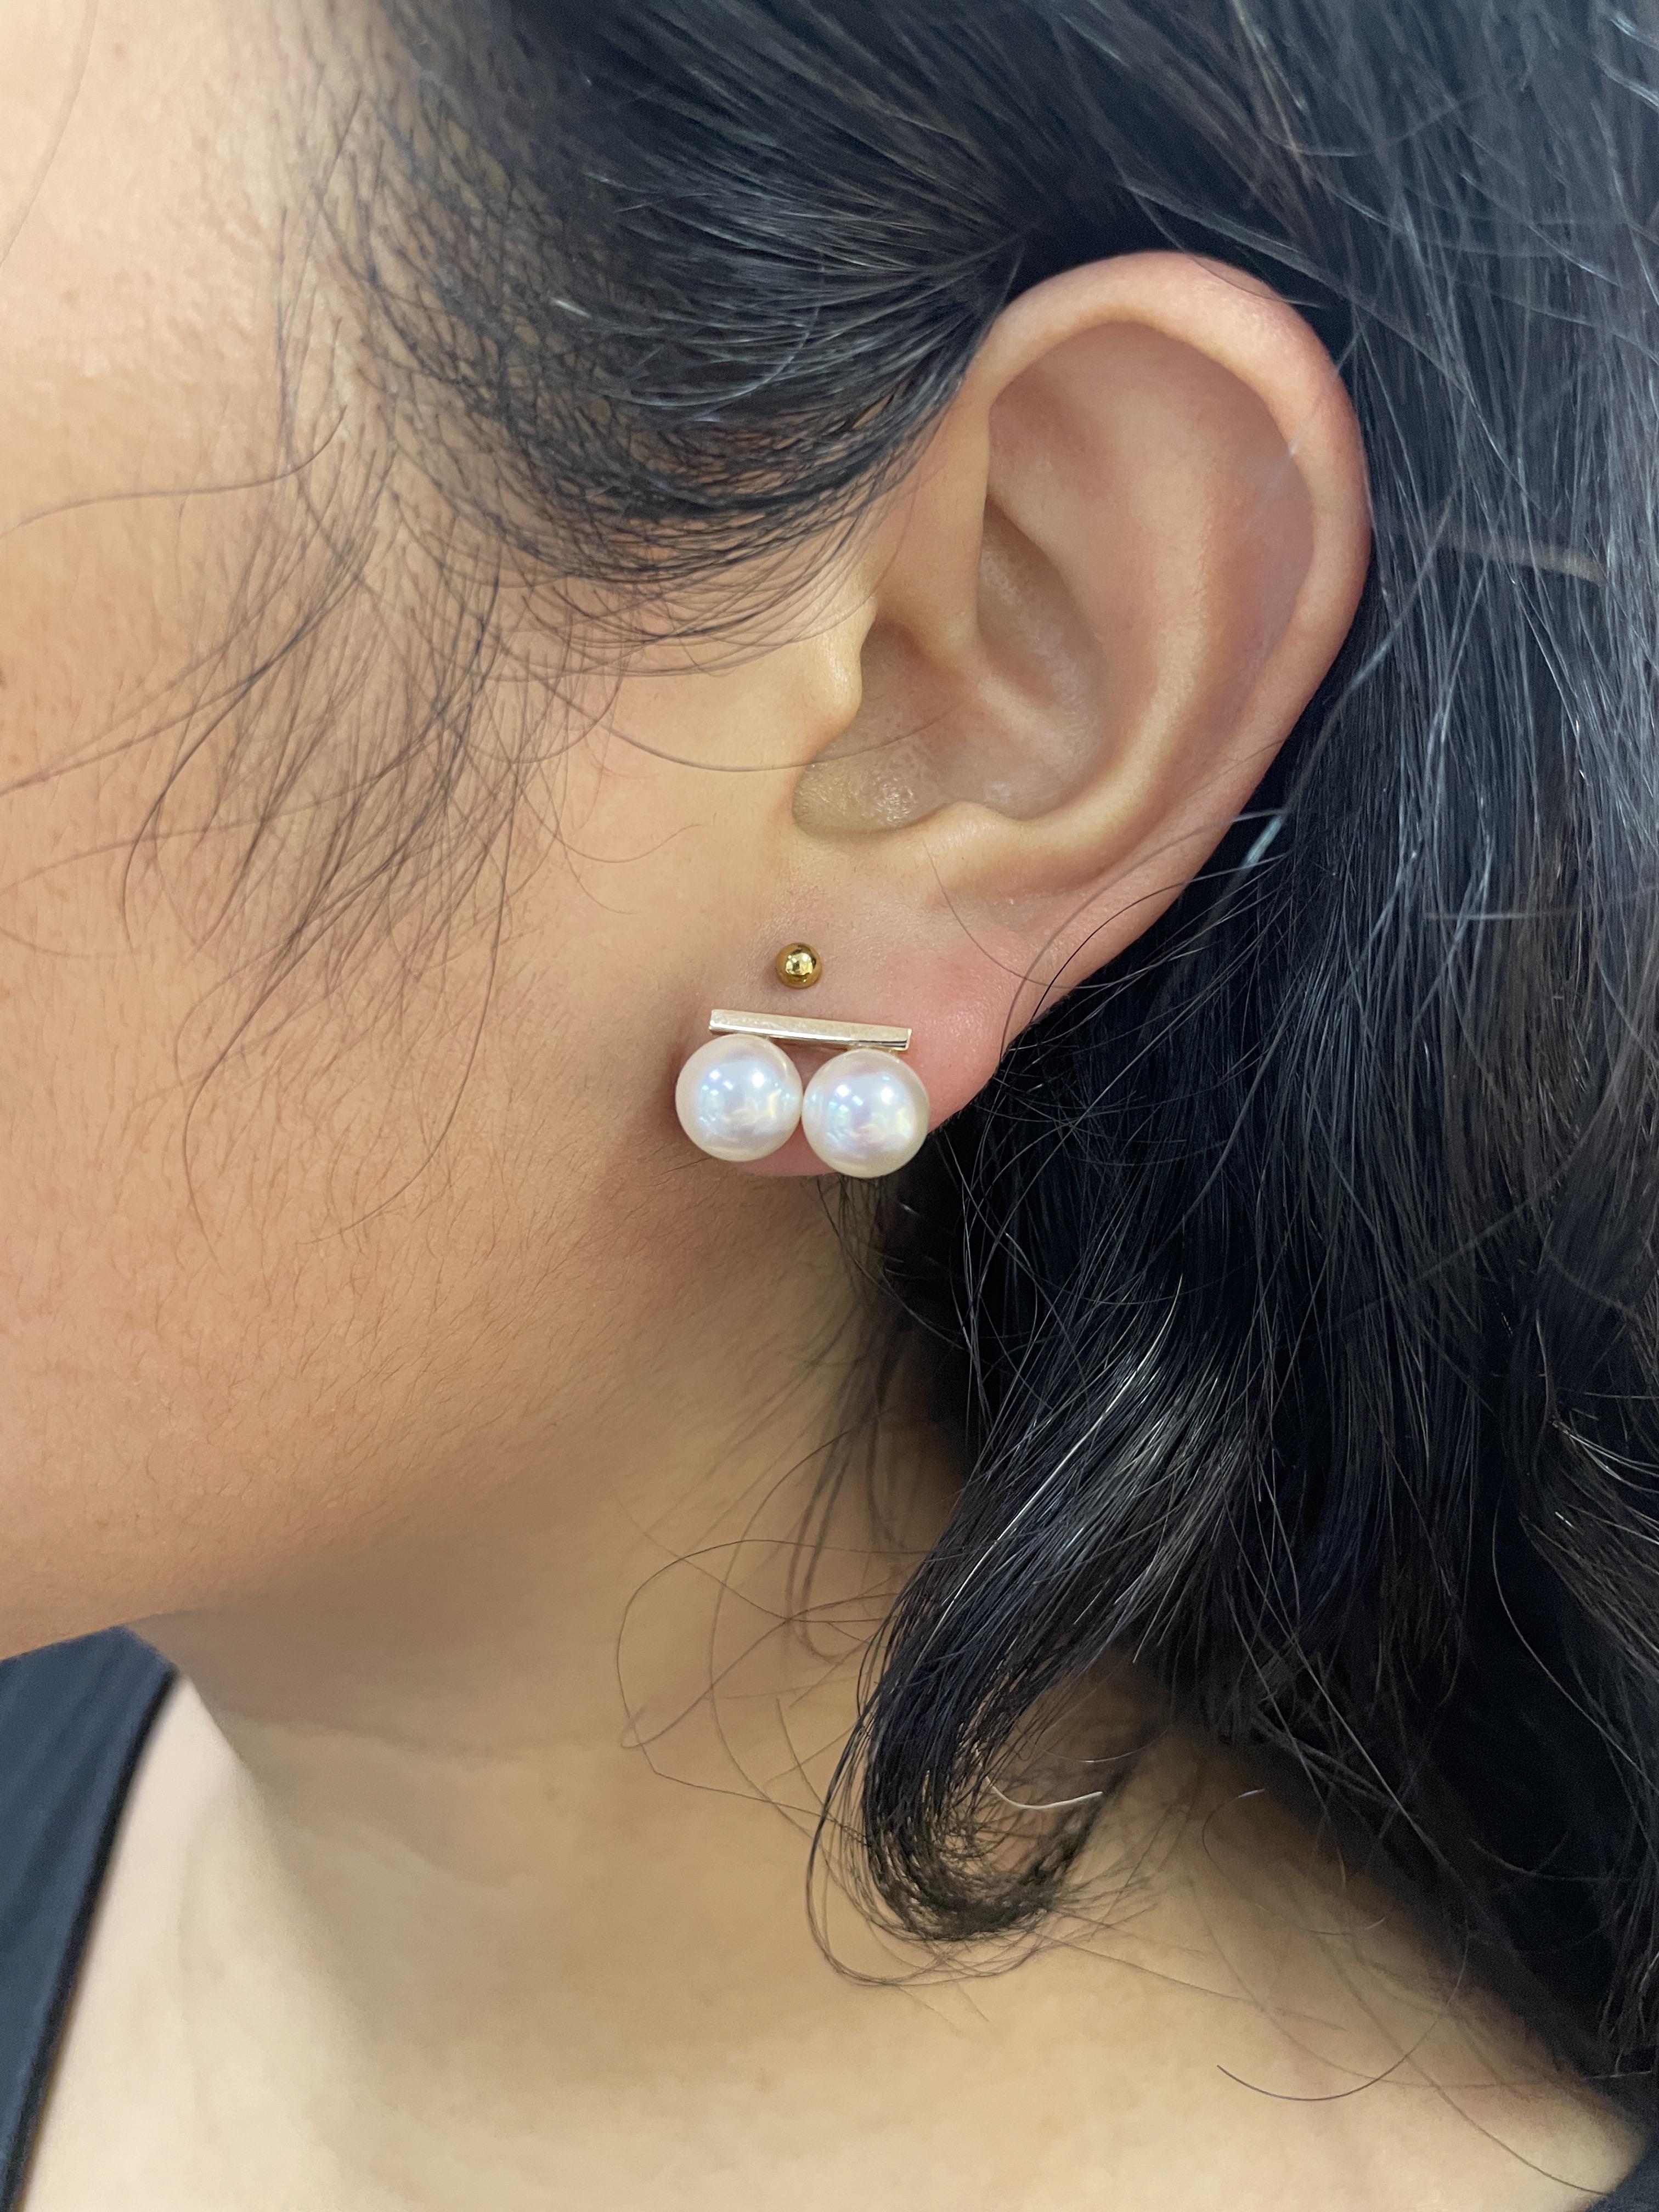 A PAIR OF DOUBLE AKOYA CULTURED PEARL STUDS EARRINGS - Image 4 of 4